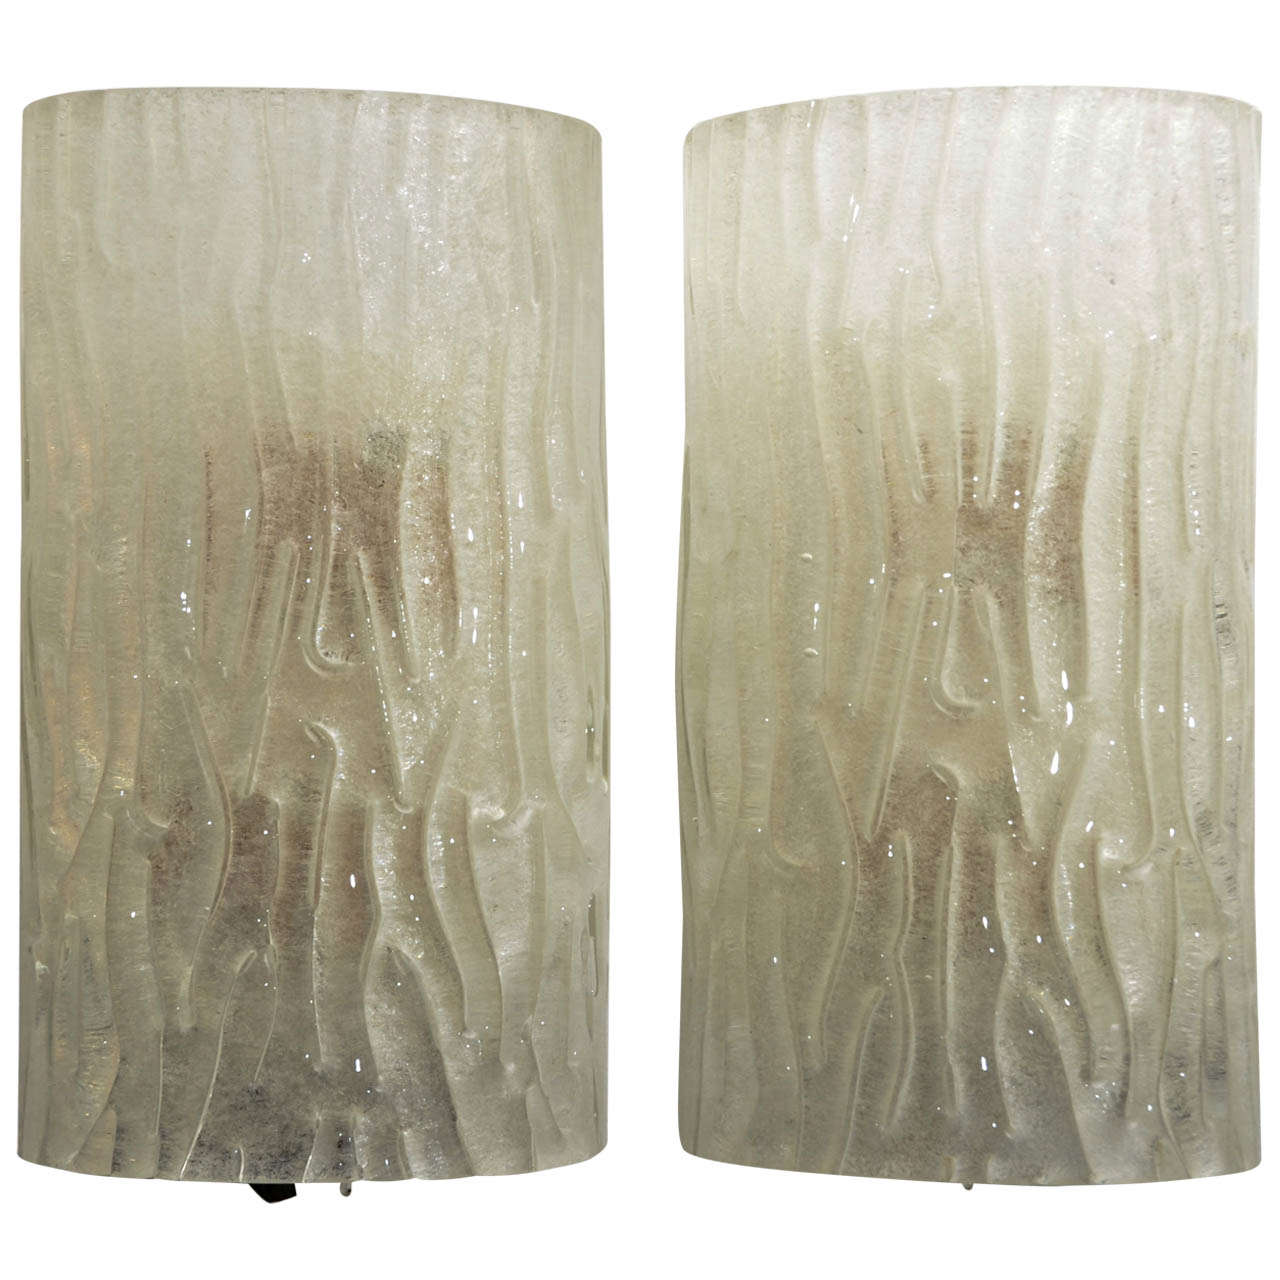 Pair of Textured Murano Glass Demilune Wall Sconces by Artisti Barovier For Sale